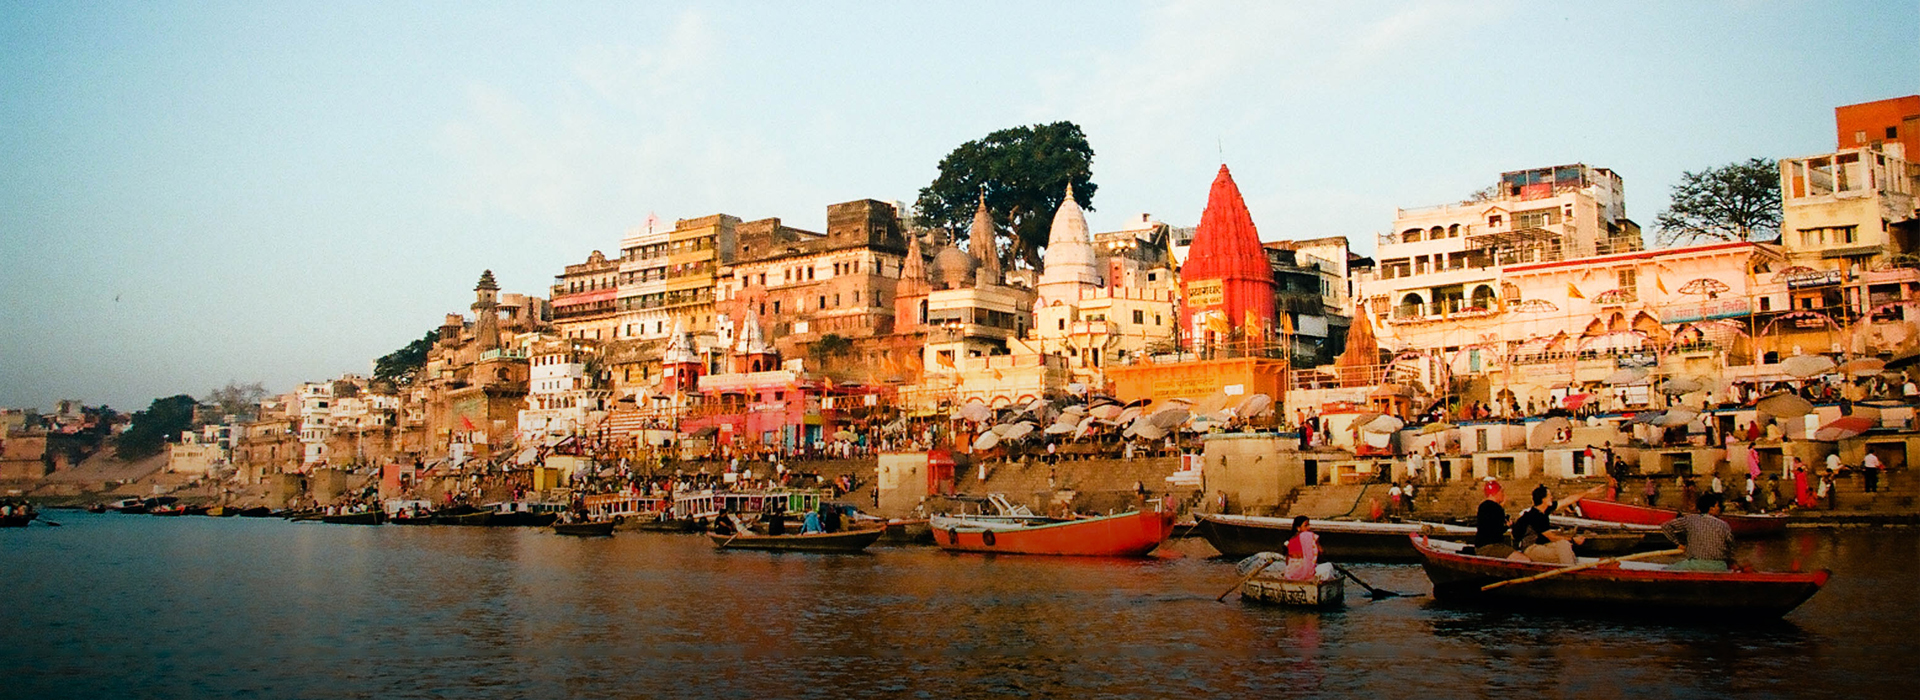 Golden Triangle & Varanasi Tour Packages